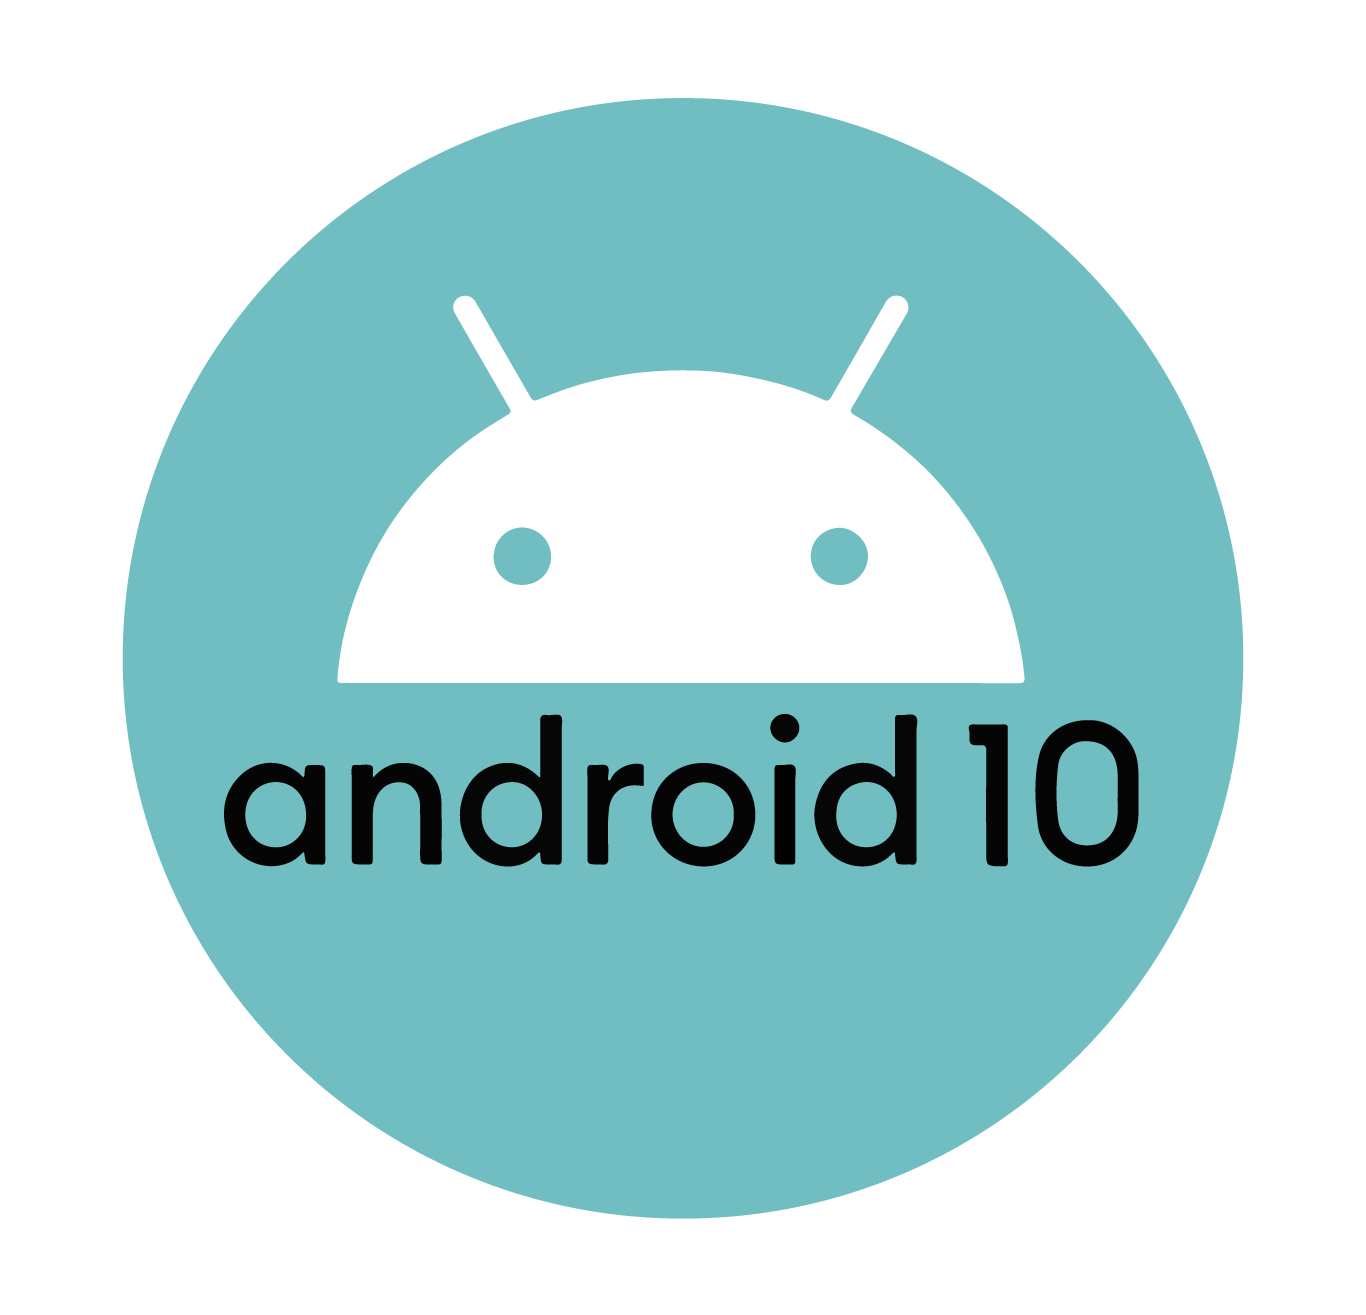 LOGO-ANDROID-10